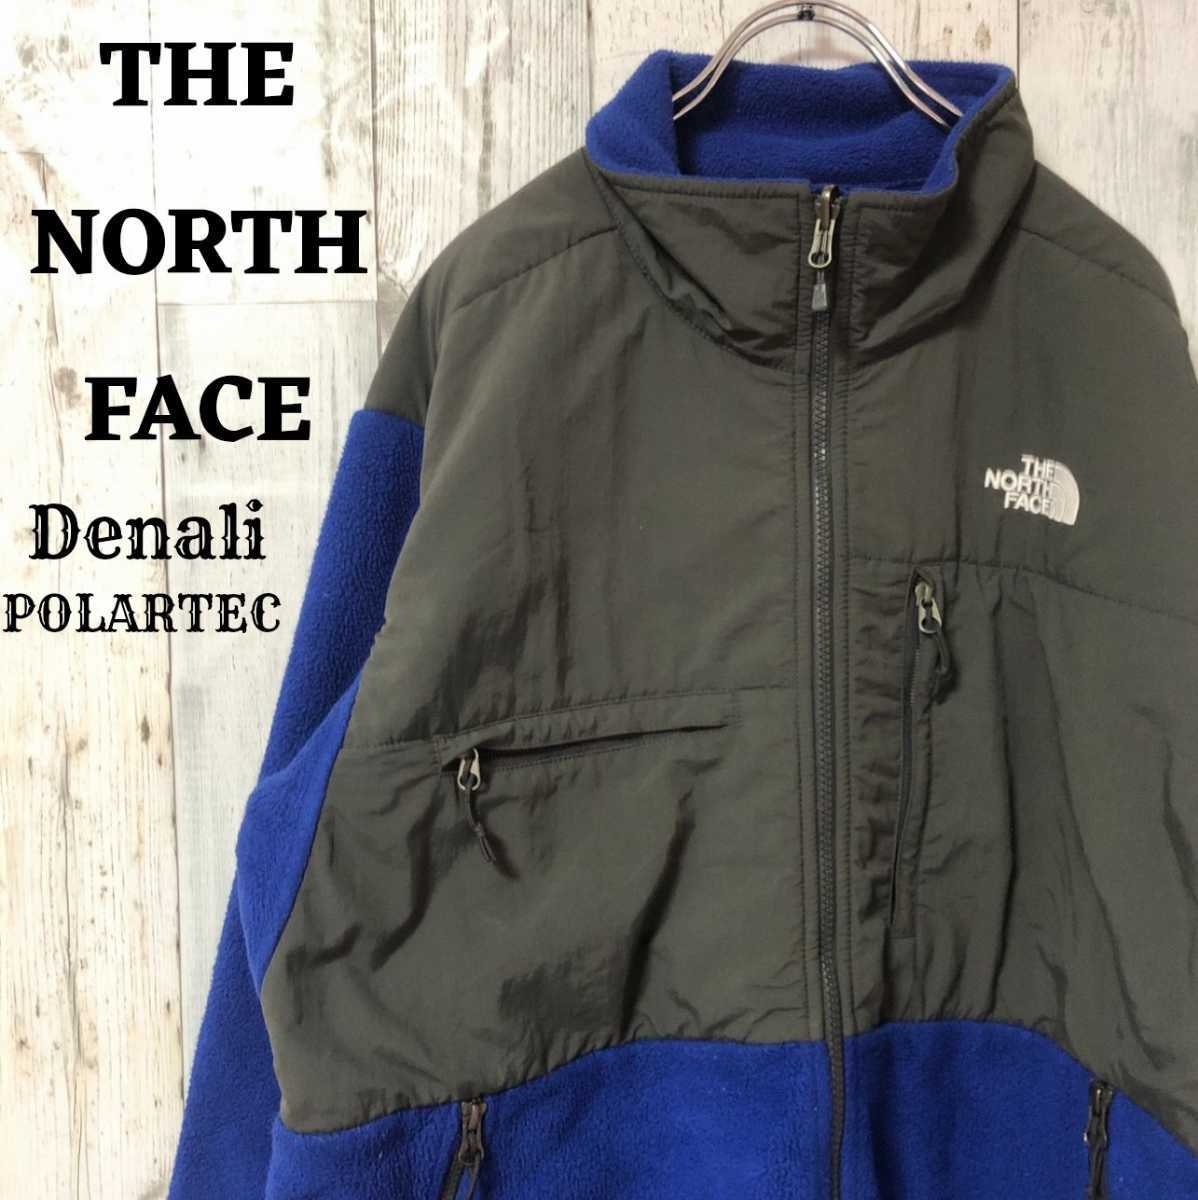 THE NORTH FACE デナリジャケット 古着   通販